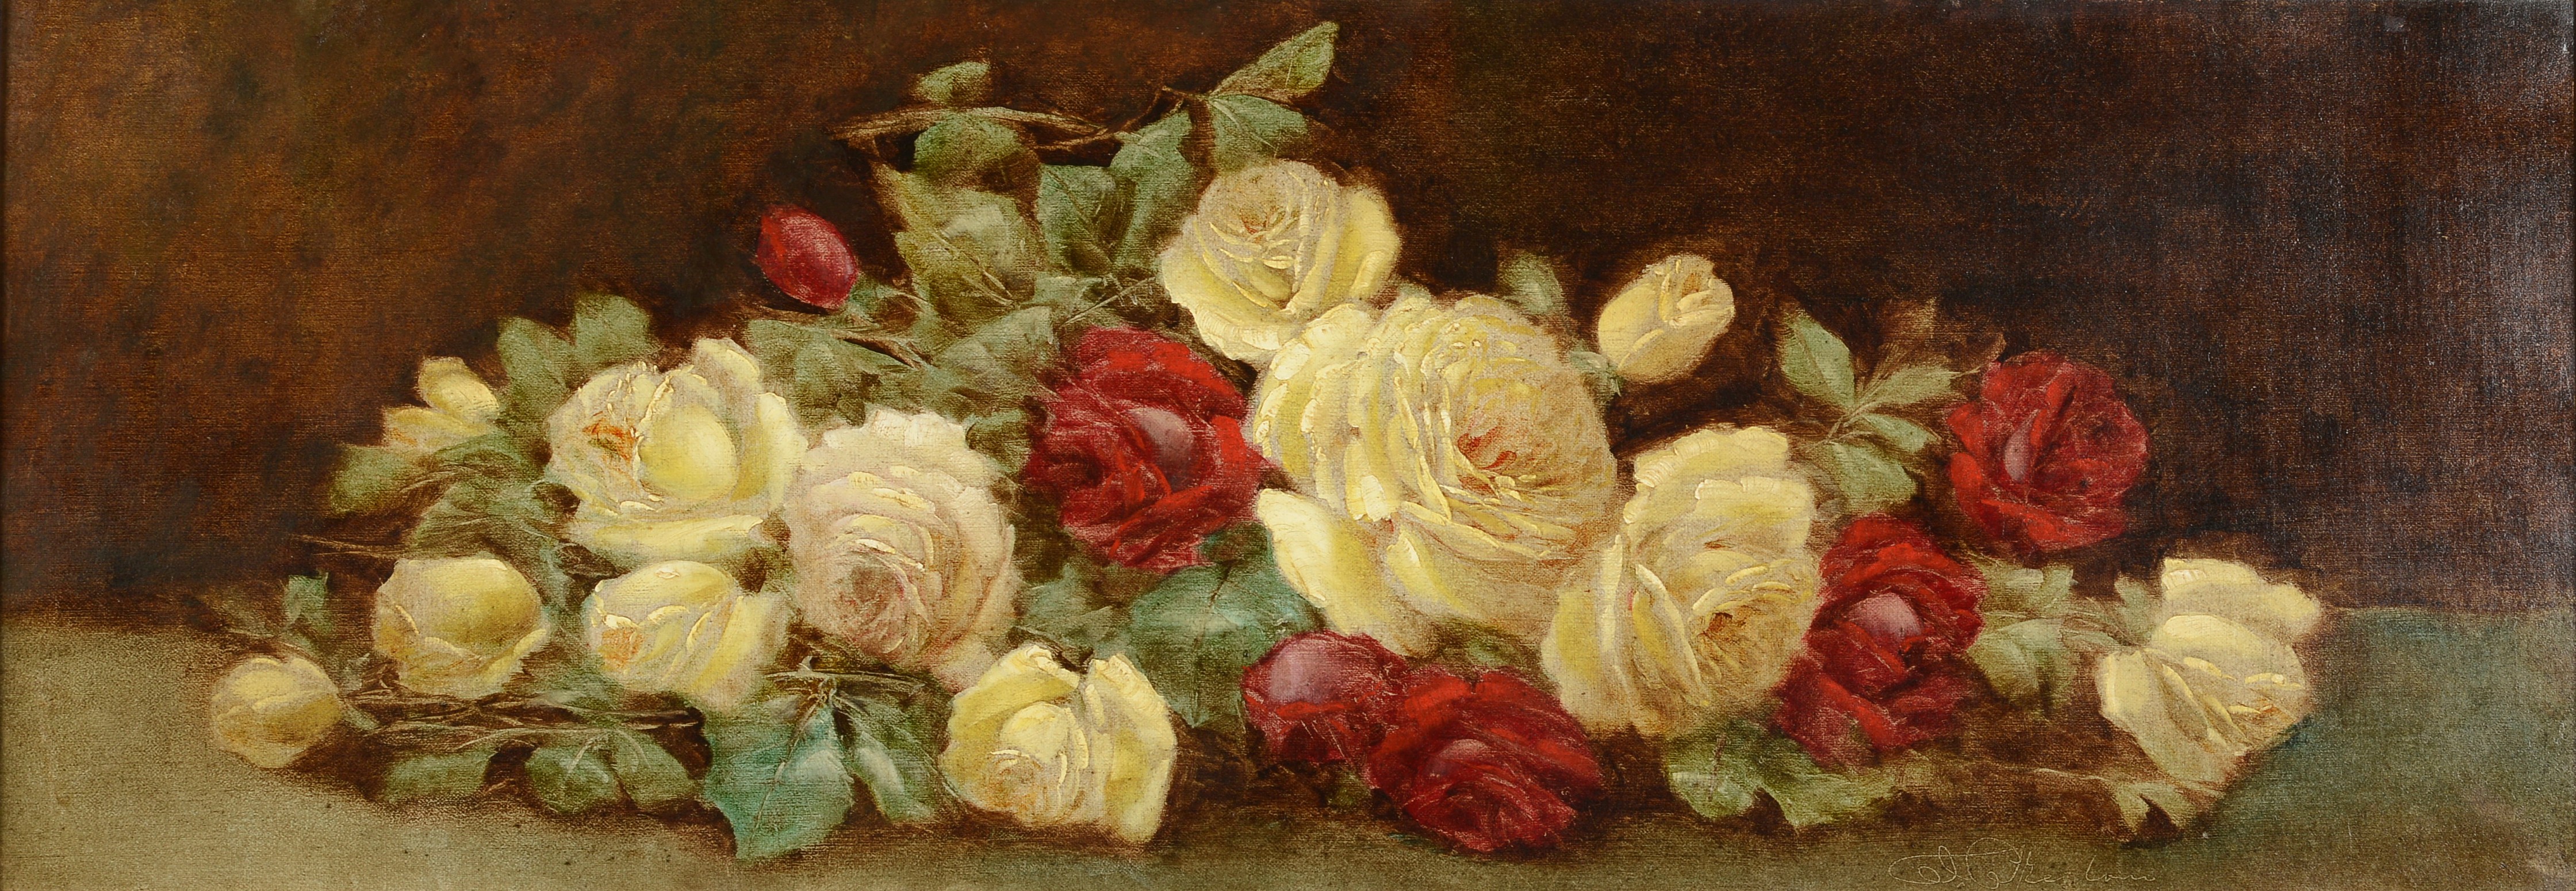 ARR W B PRESTON (20th century), Still life of yellow and red roses, oil on canvas,